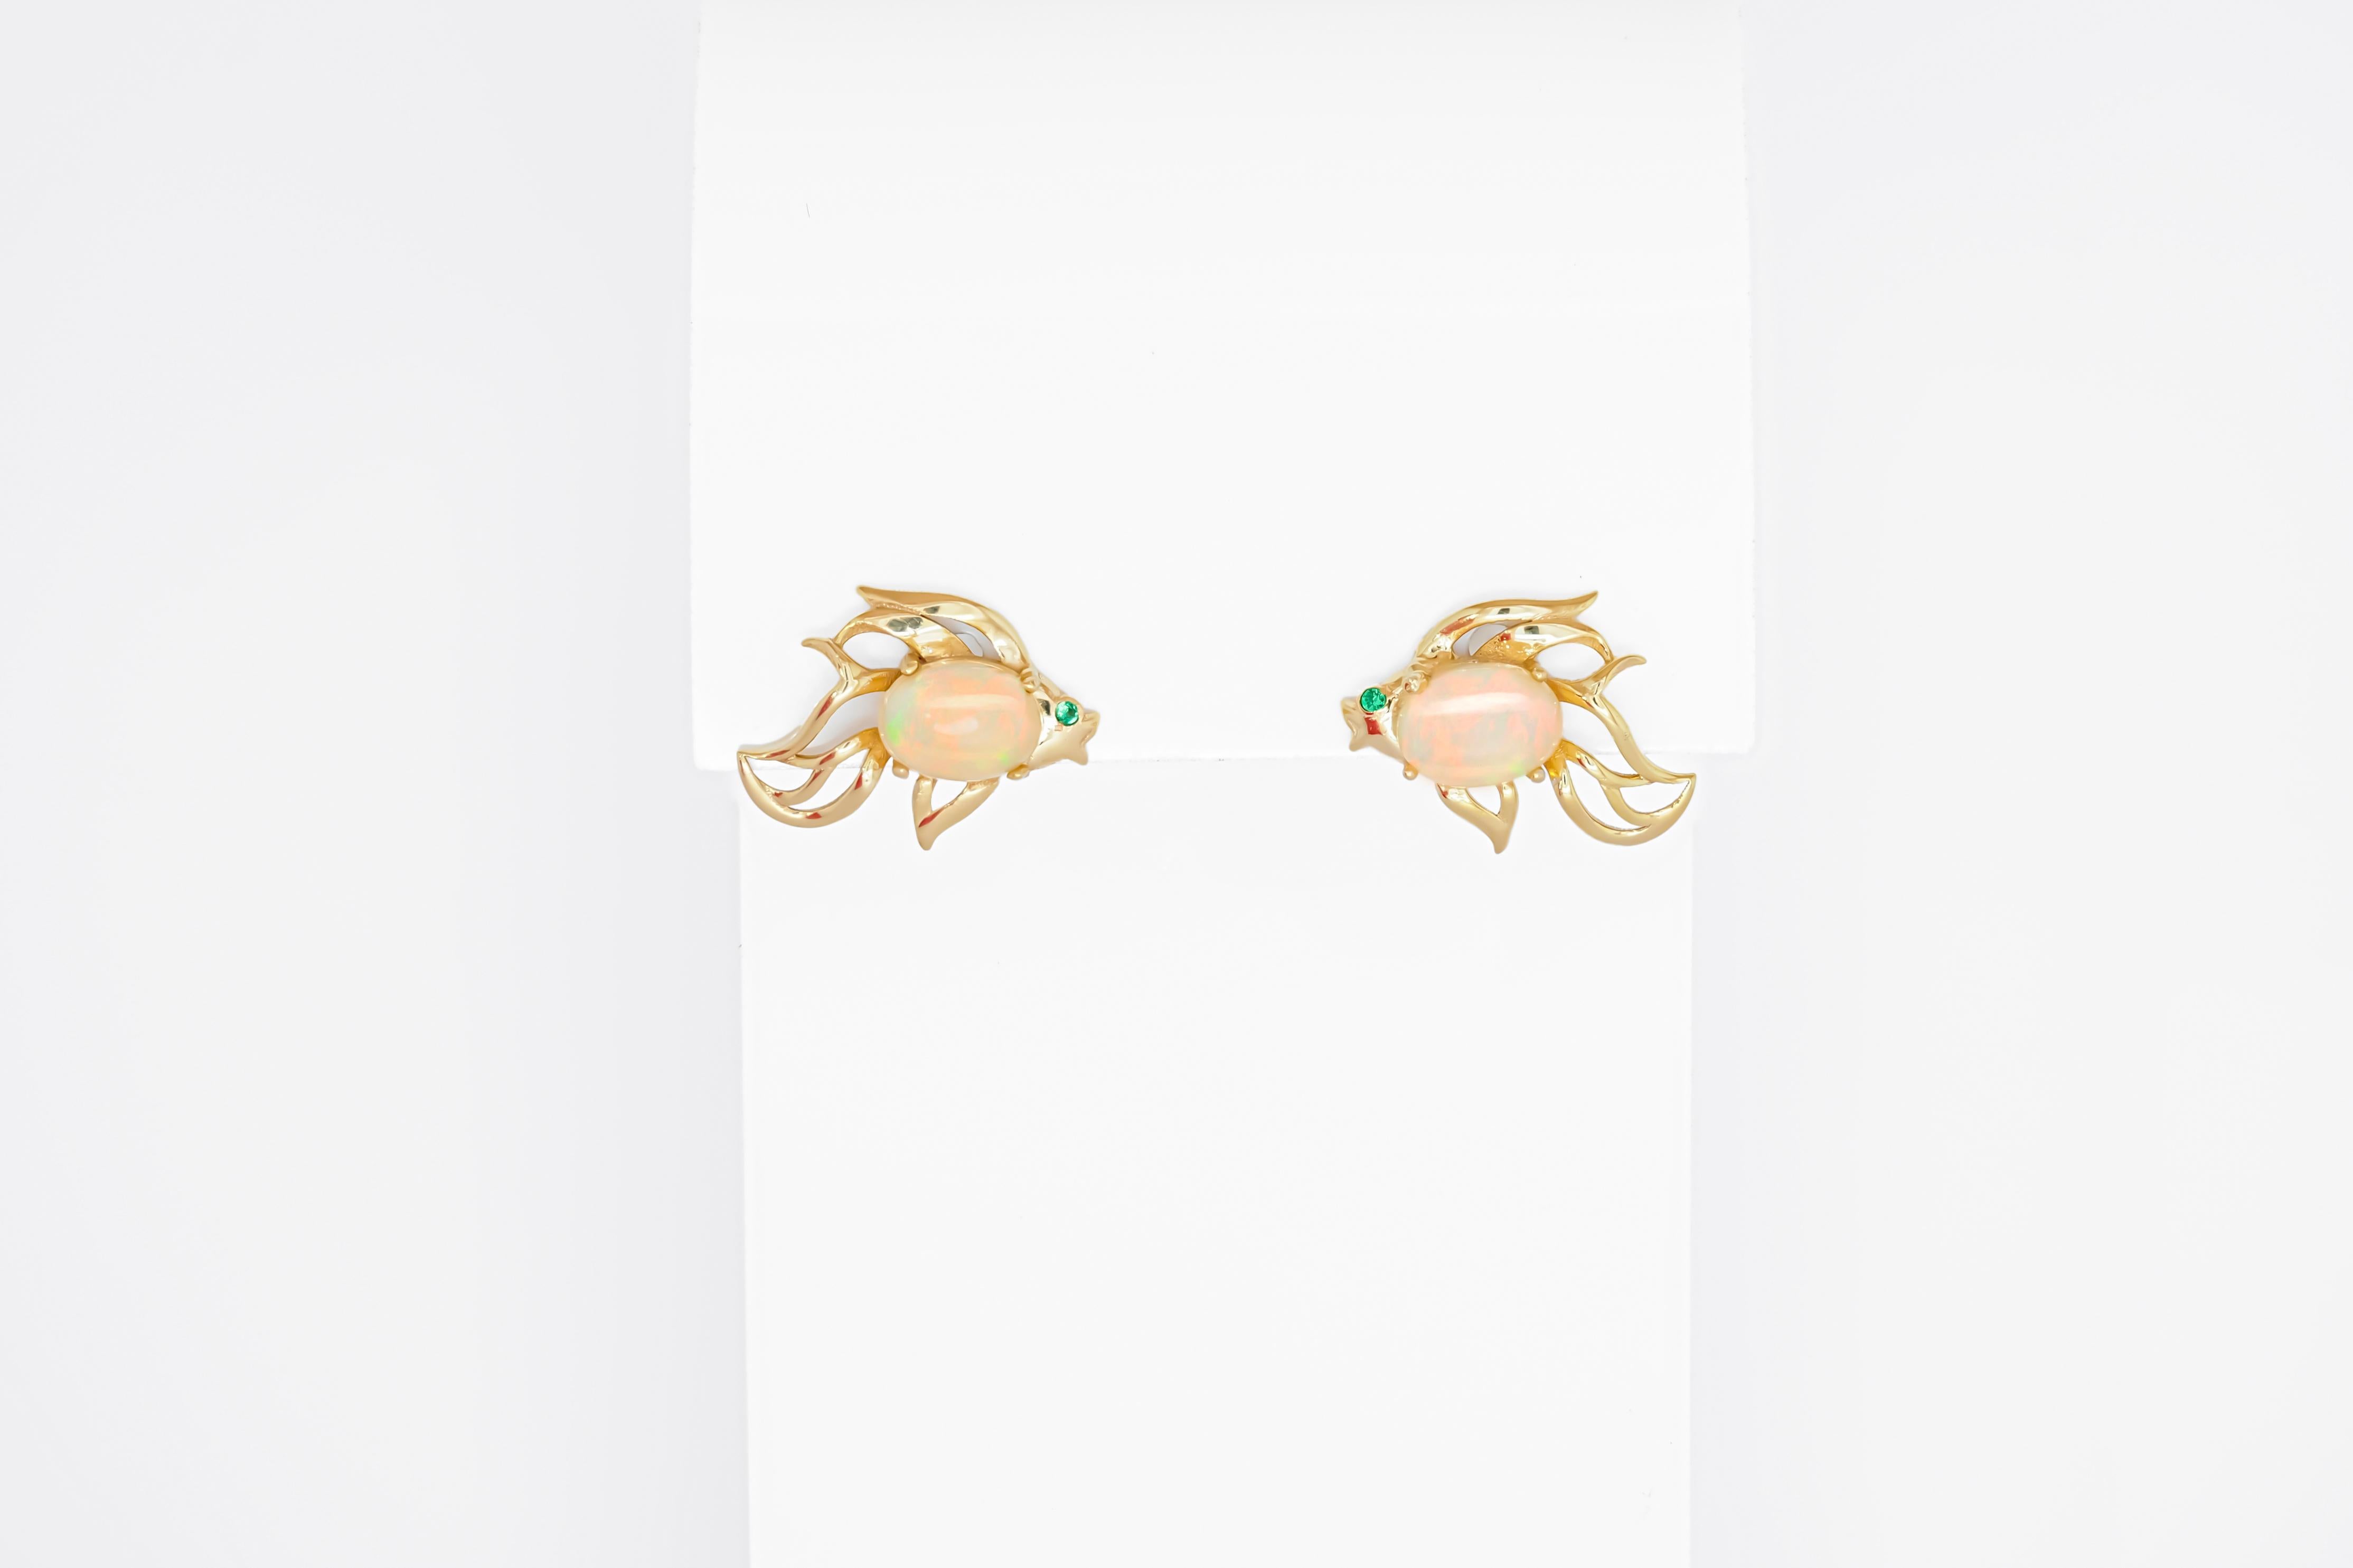 14k gold Fish earrings studs set in 14k gold. Opal earrings studs. Opal cabochon earrings. Animal Little Fish Jewelry. October Birthstone Opal Lucky fish Gift.

Metal: 14k gold
Size: 18x16mm and same for earrings
Total Weight: 3.3 g.
Set with opal,